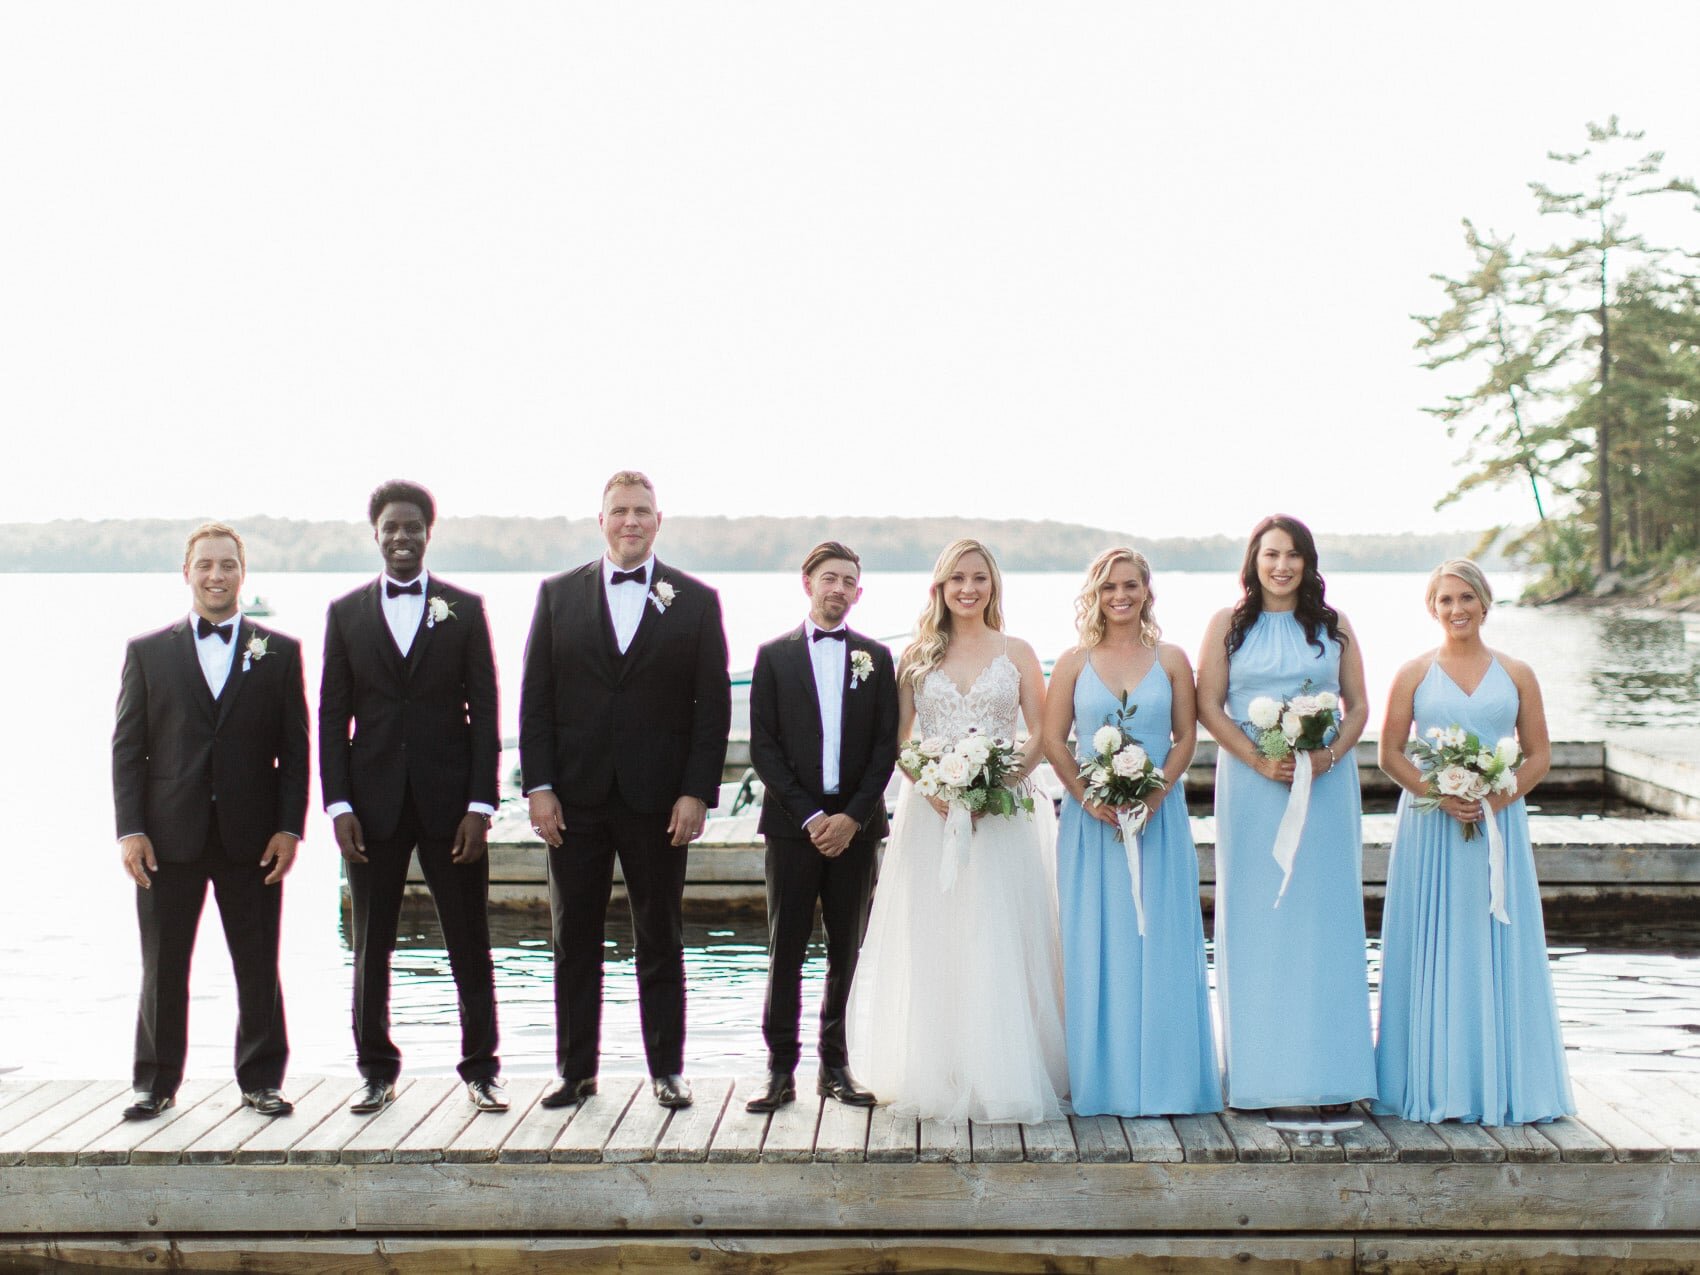 wedding party bridesmaids and groomsmen posing naturally for a candid happy photo at a wedding at windermere house muskoka